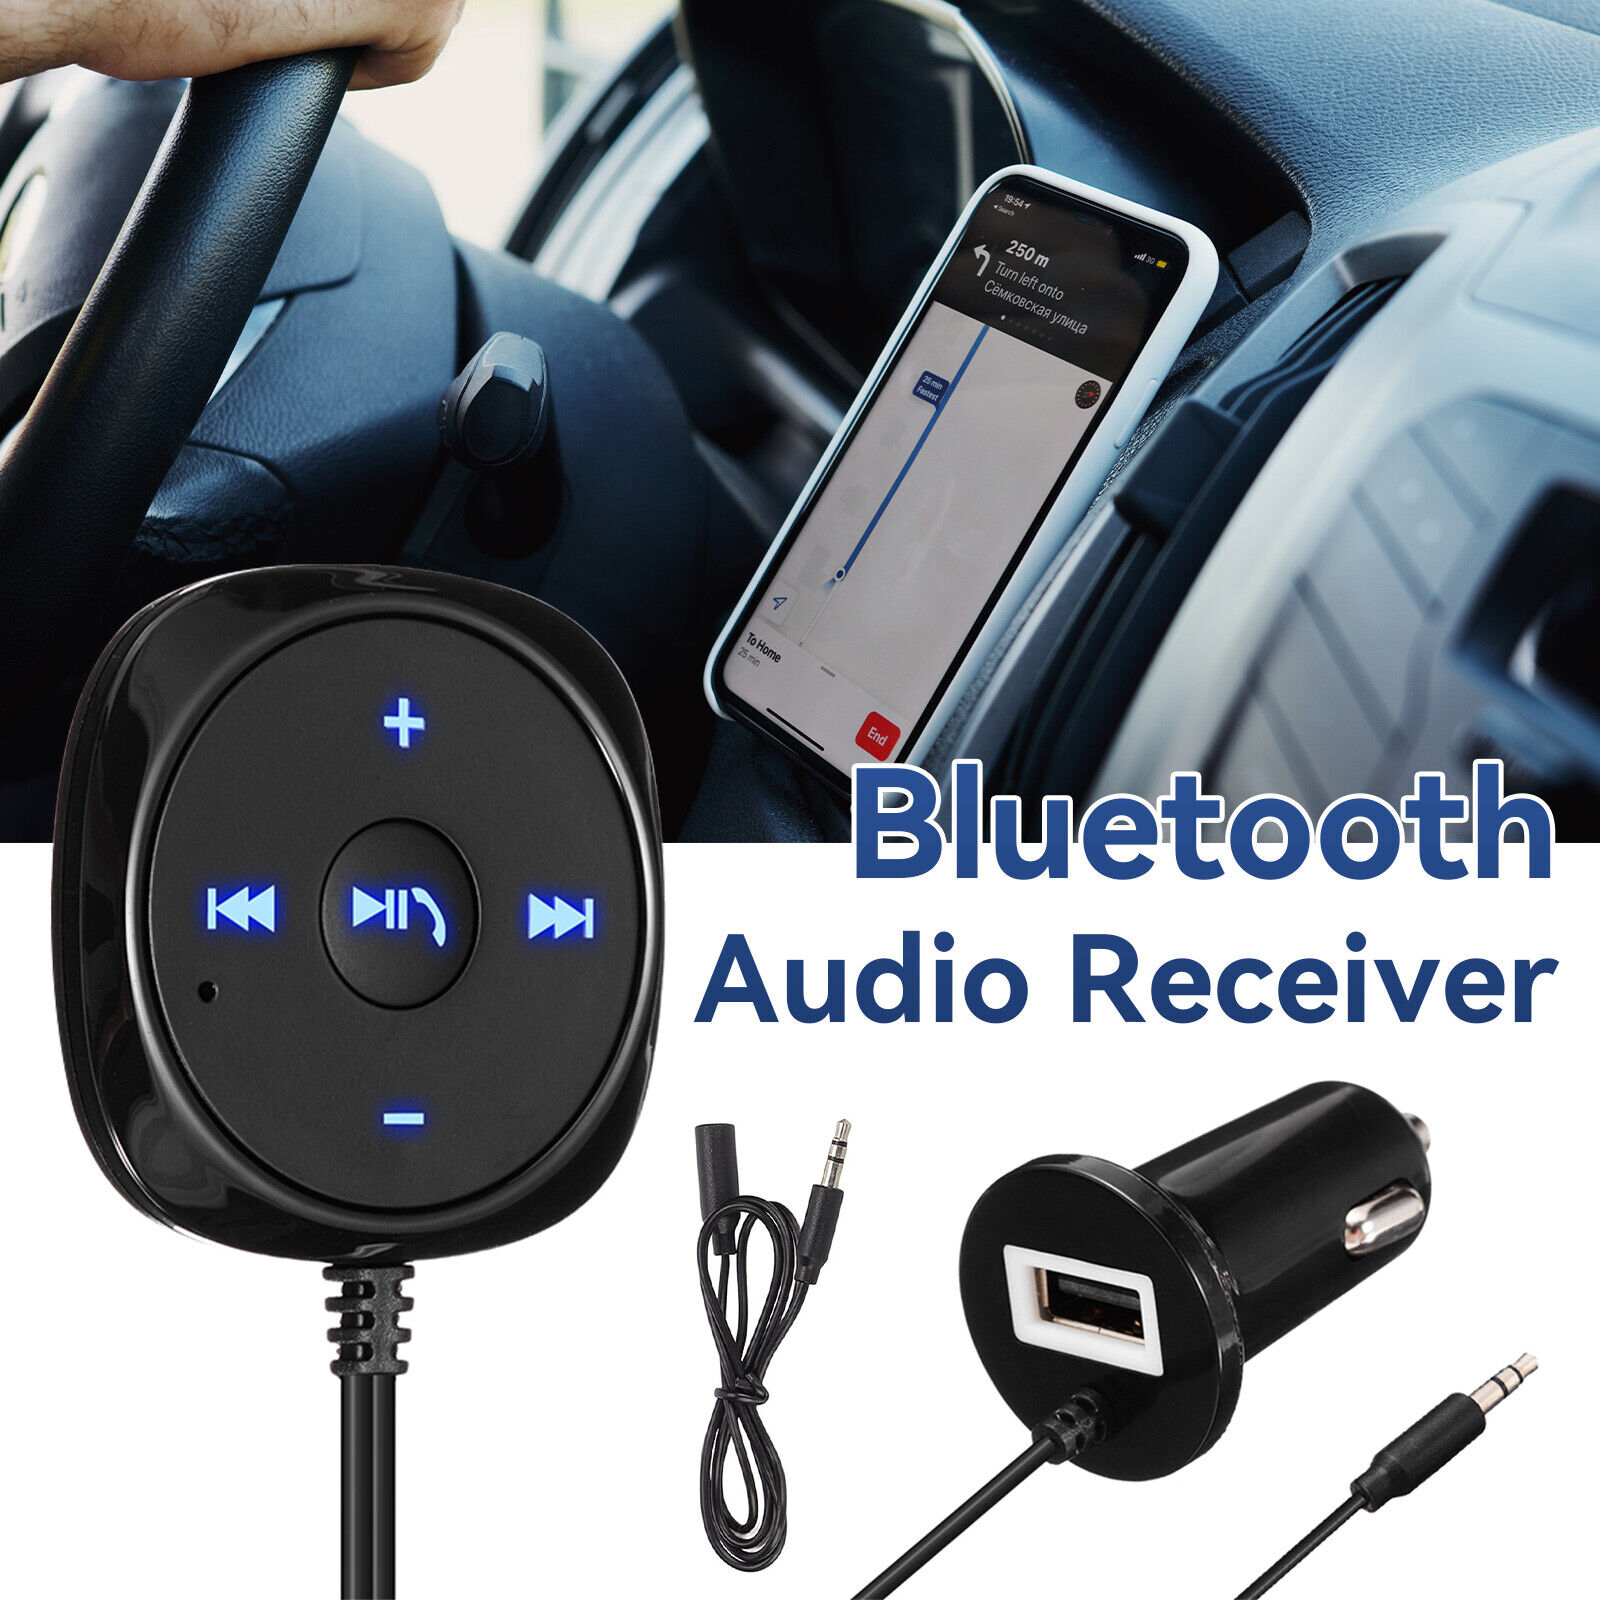 AUX-in Bluetooth Wireless Receiver & Transmitter Adapter For Car Stereo Audio US